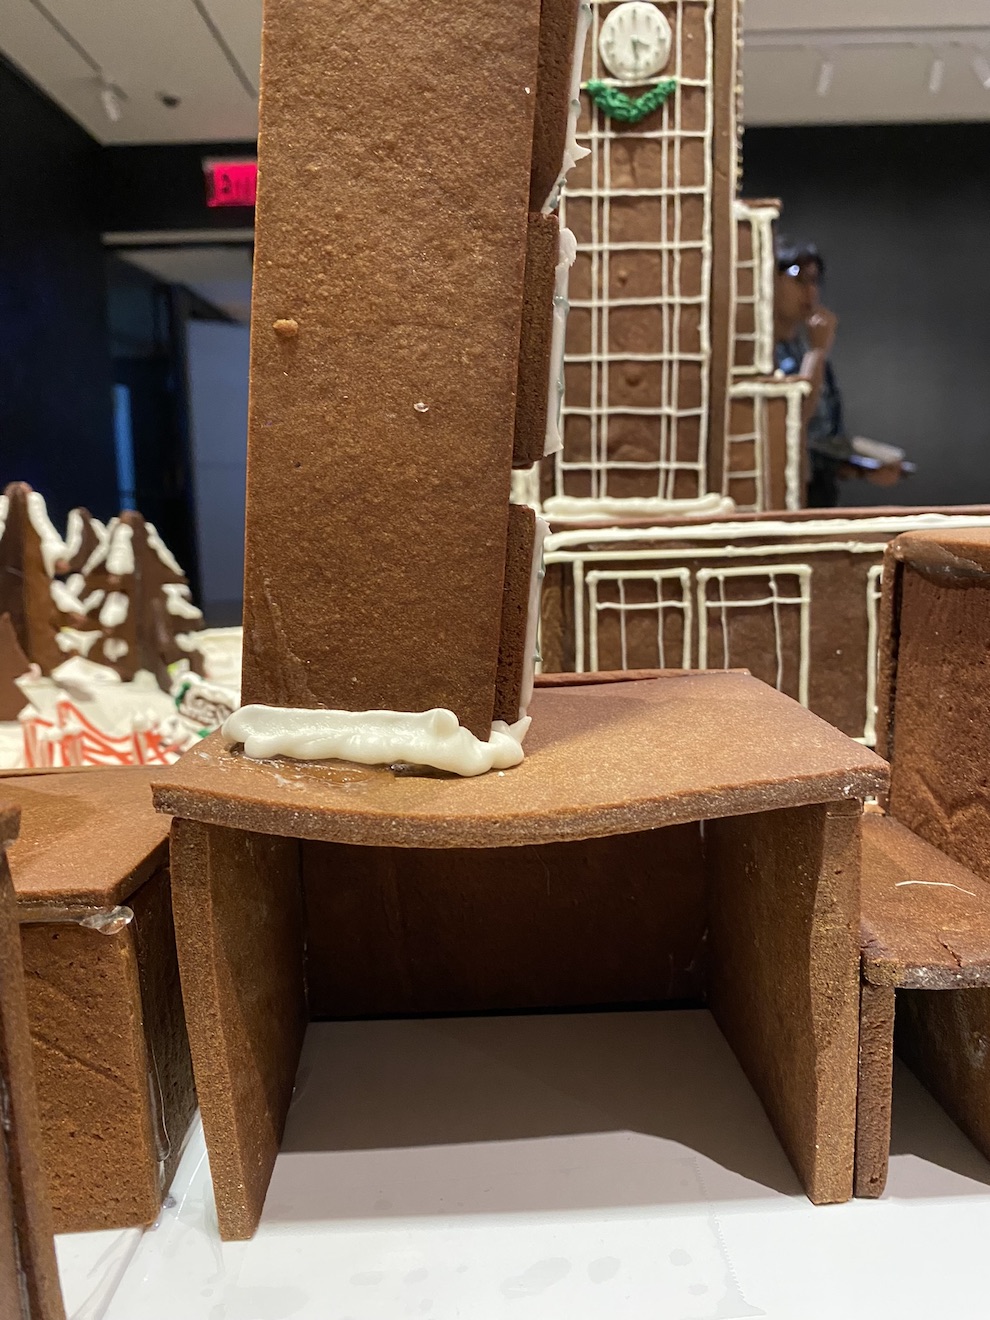 Gingerbread display of Madison Square Park in mid-installation. The roof section show in the display is beginning to sag.